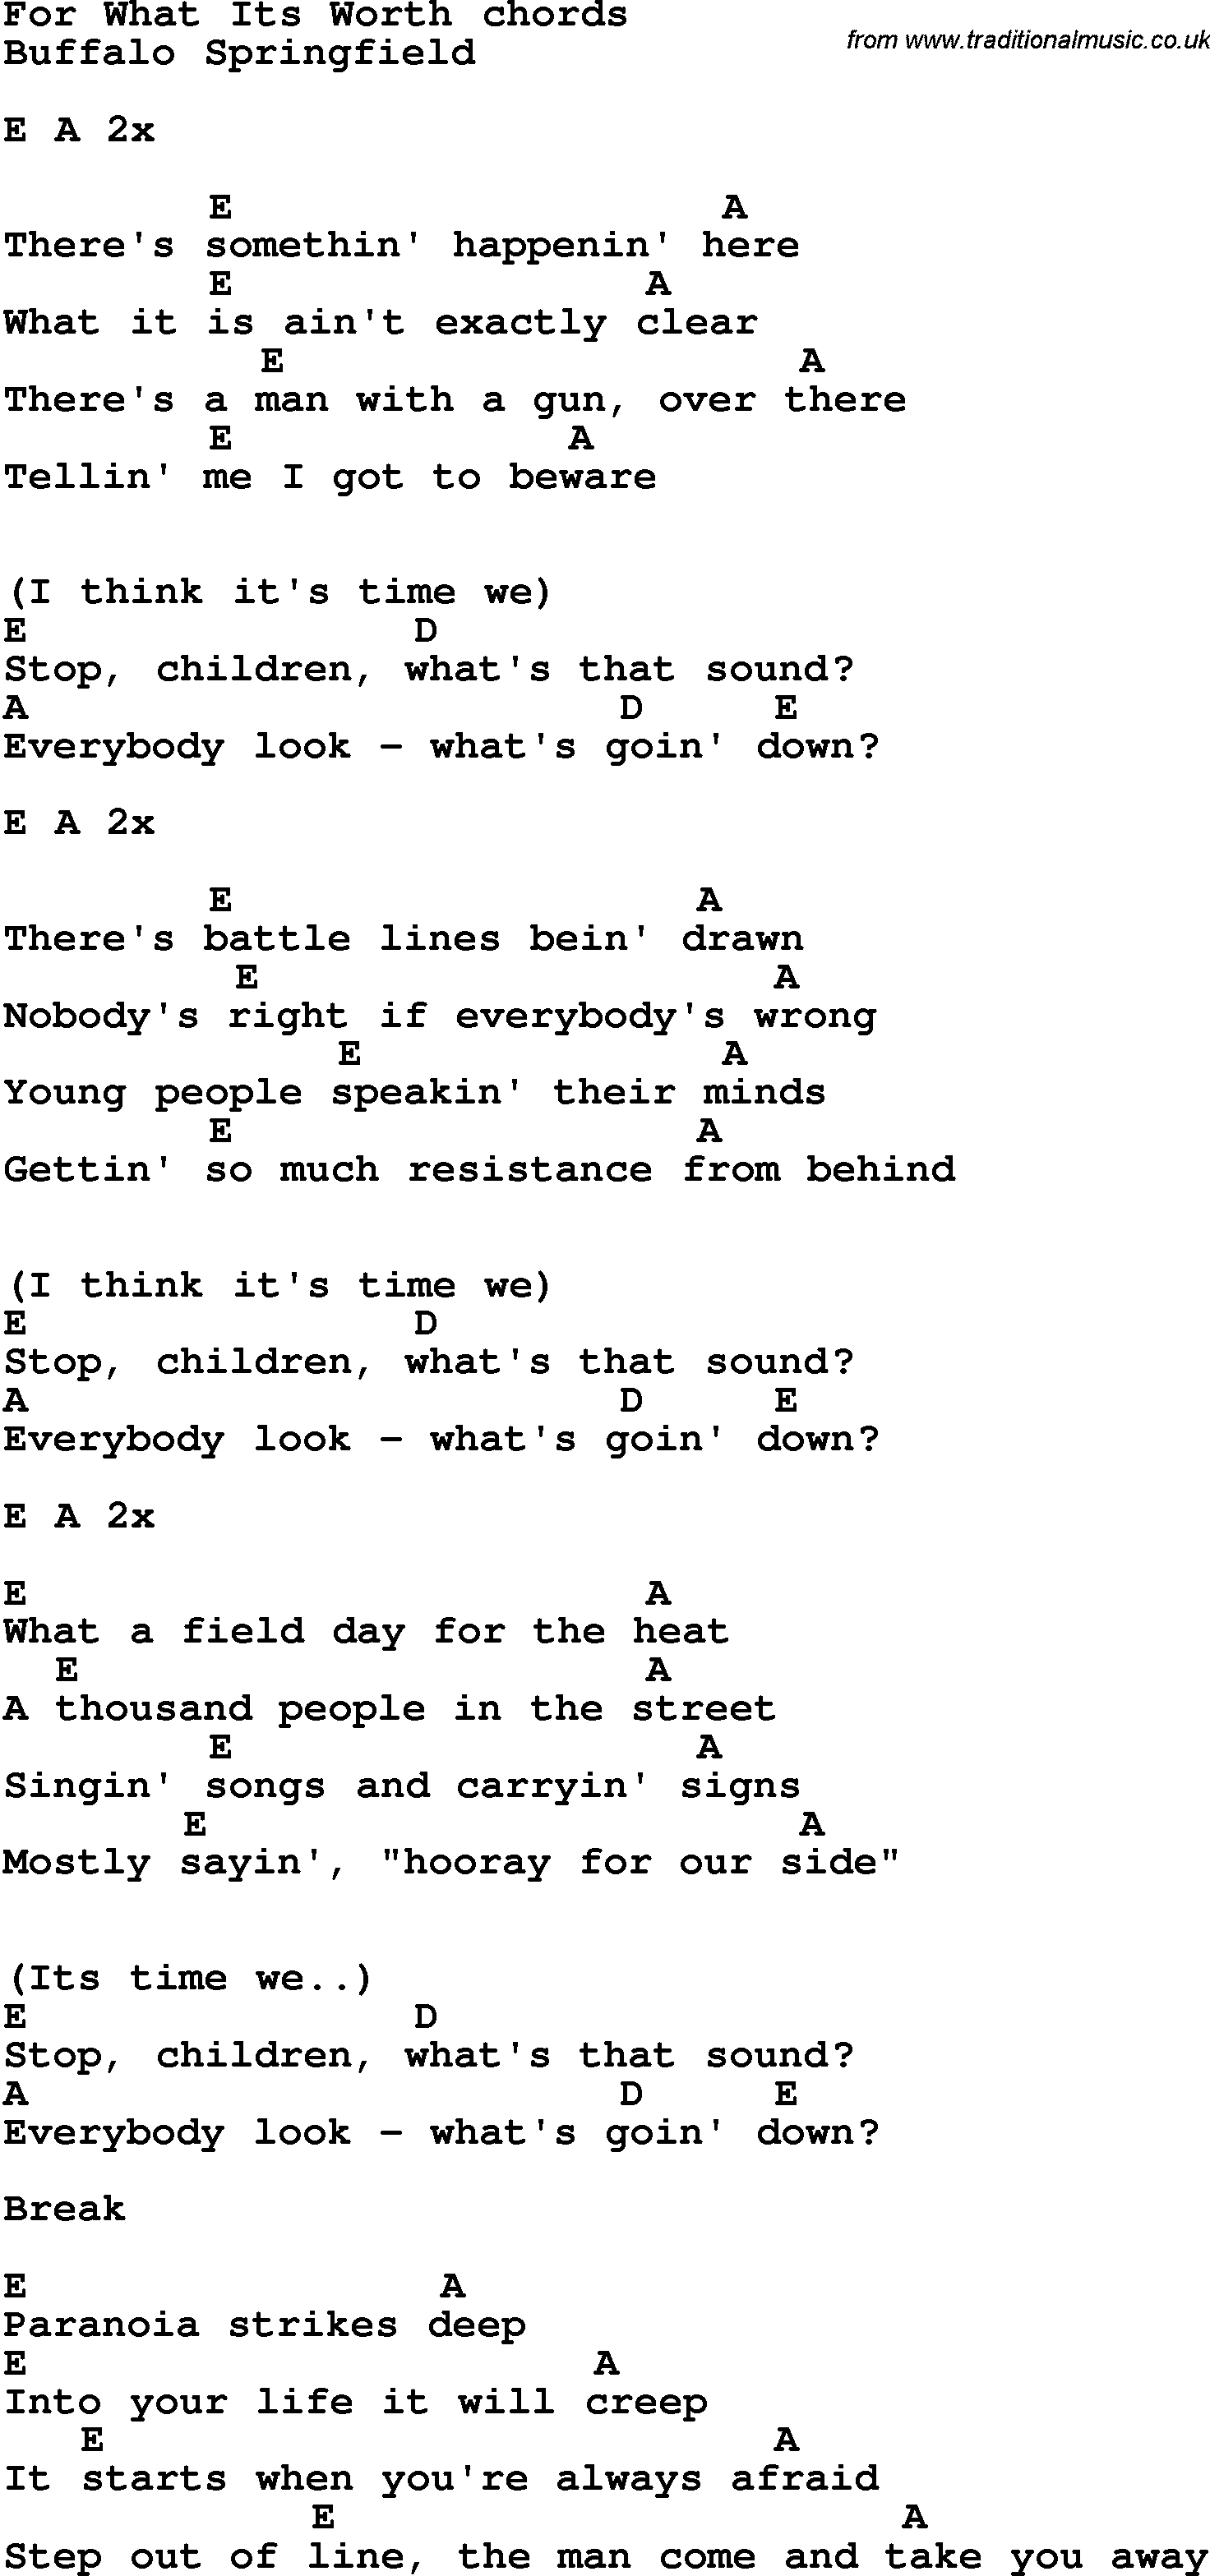 Song Lyrics with guitar chords for For What Its Worth